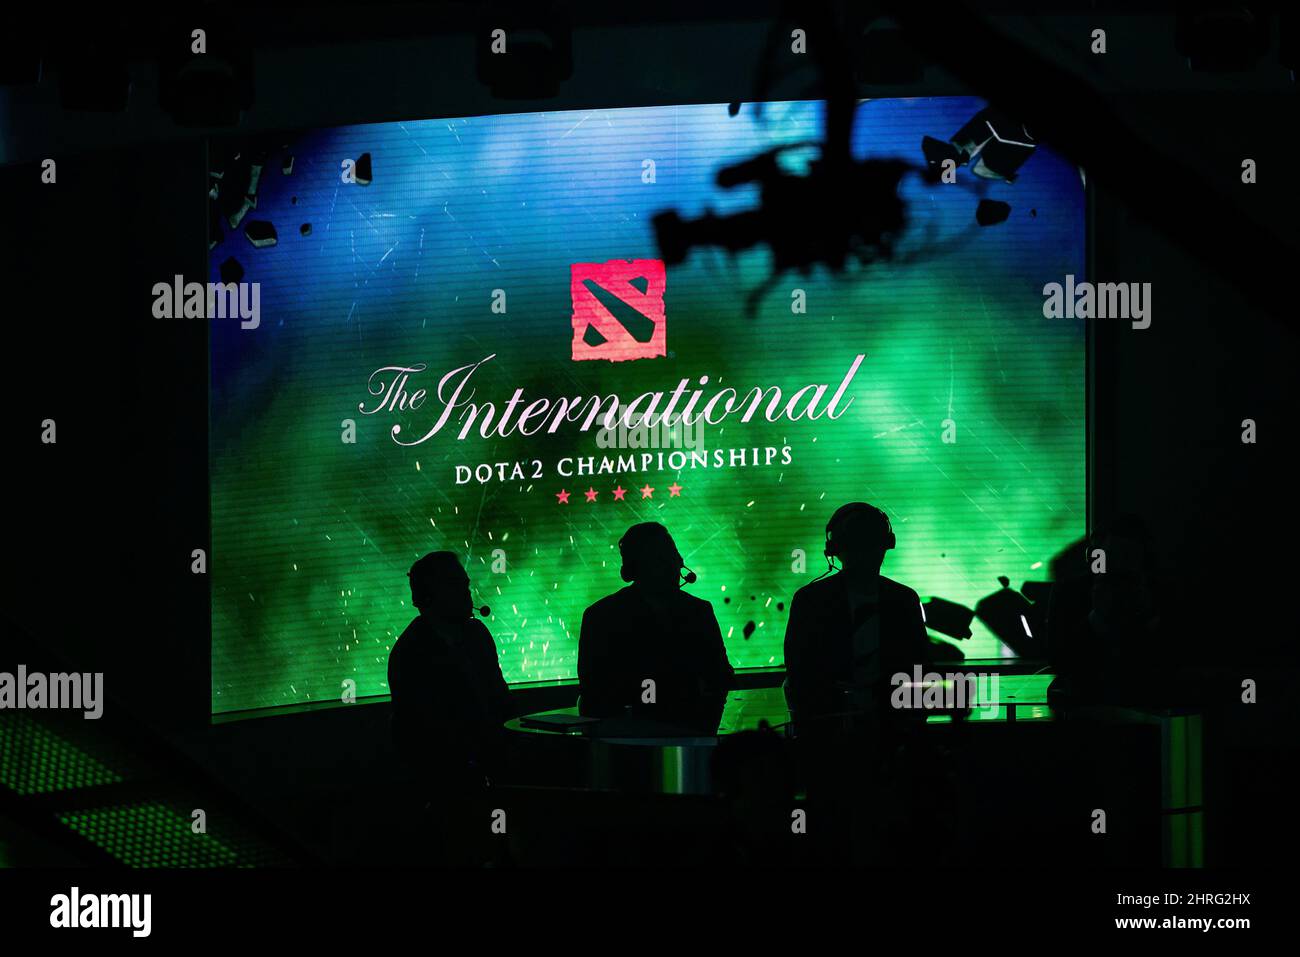 Announcers are silhouetted during the International Dota 2 Championships in Vancouver, on Monday August 20, 2018